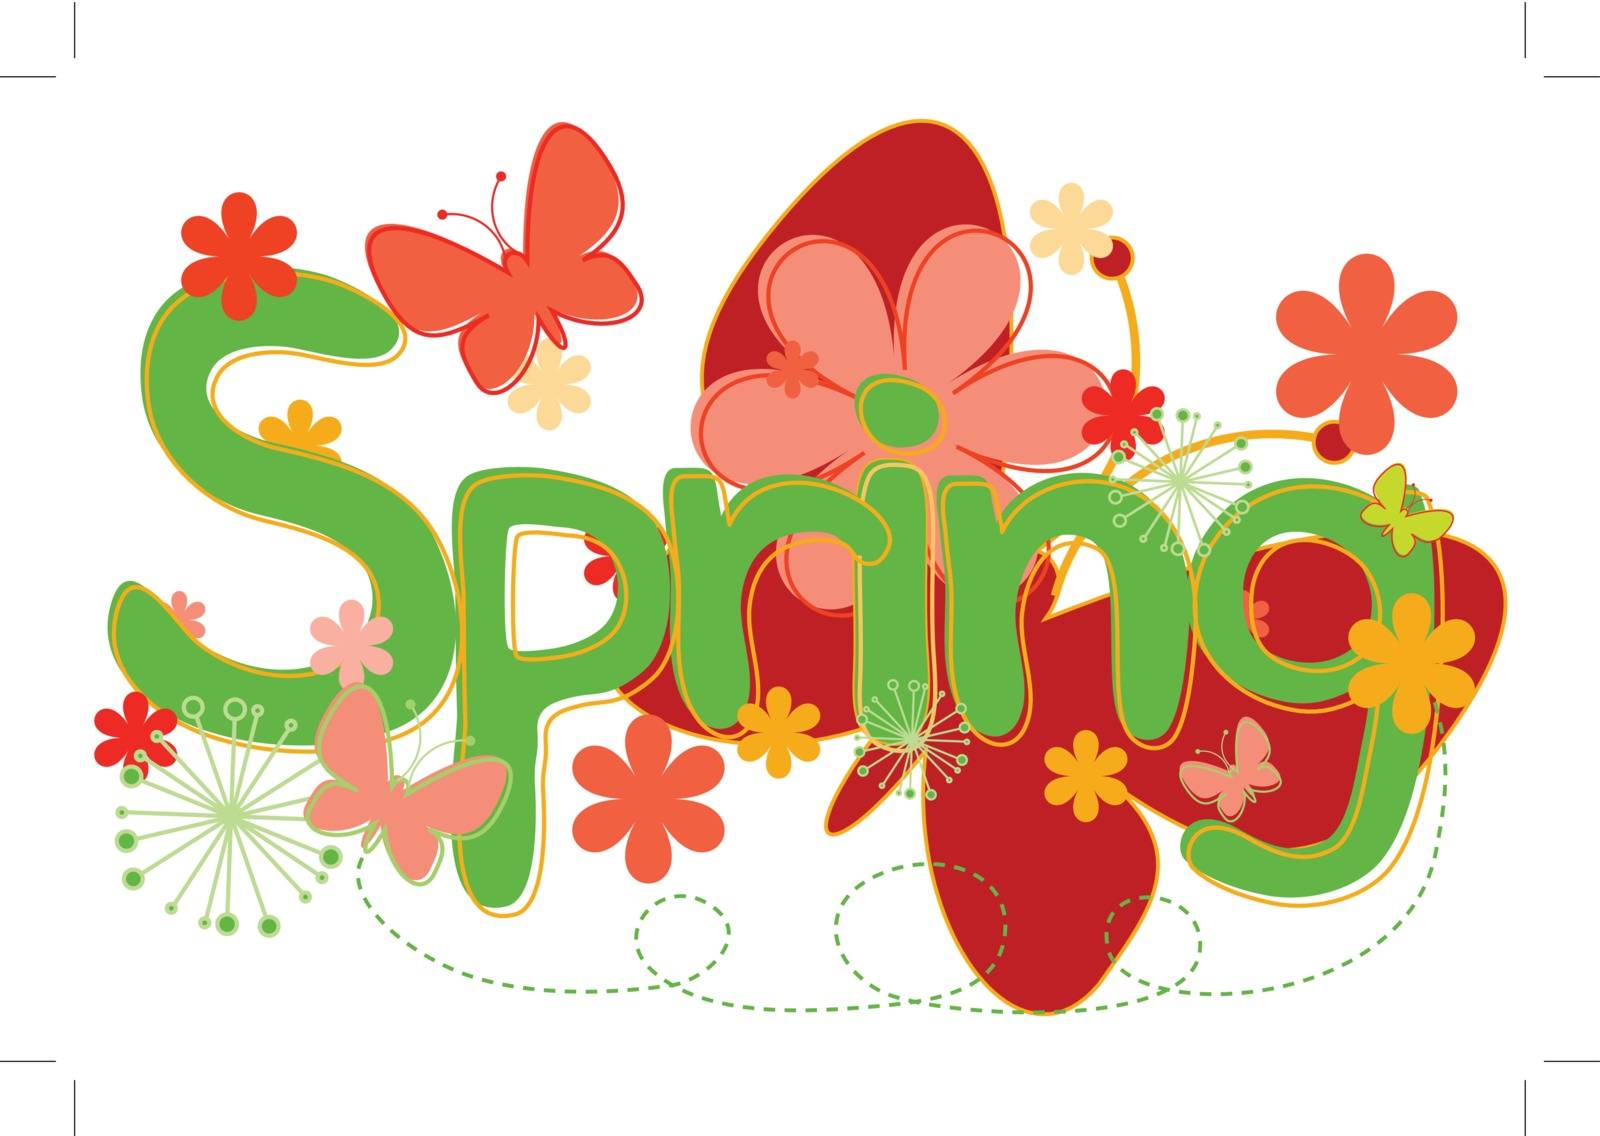 Abstract concept collage of handdrawn “Spring” text with flowers and butterflies.